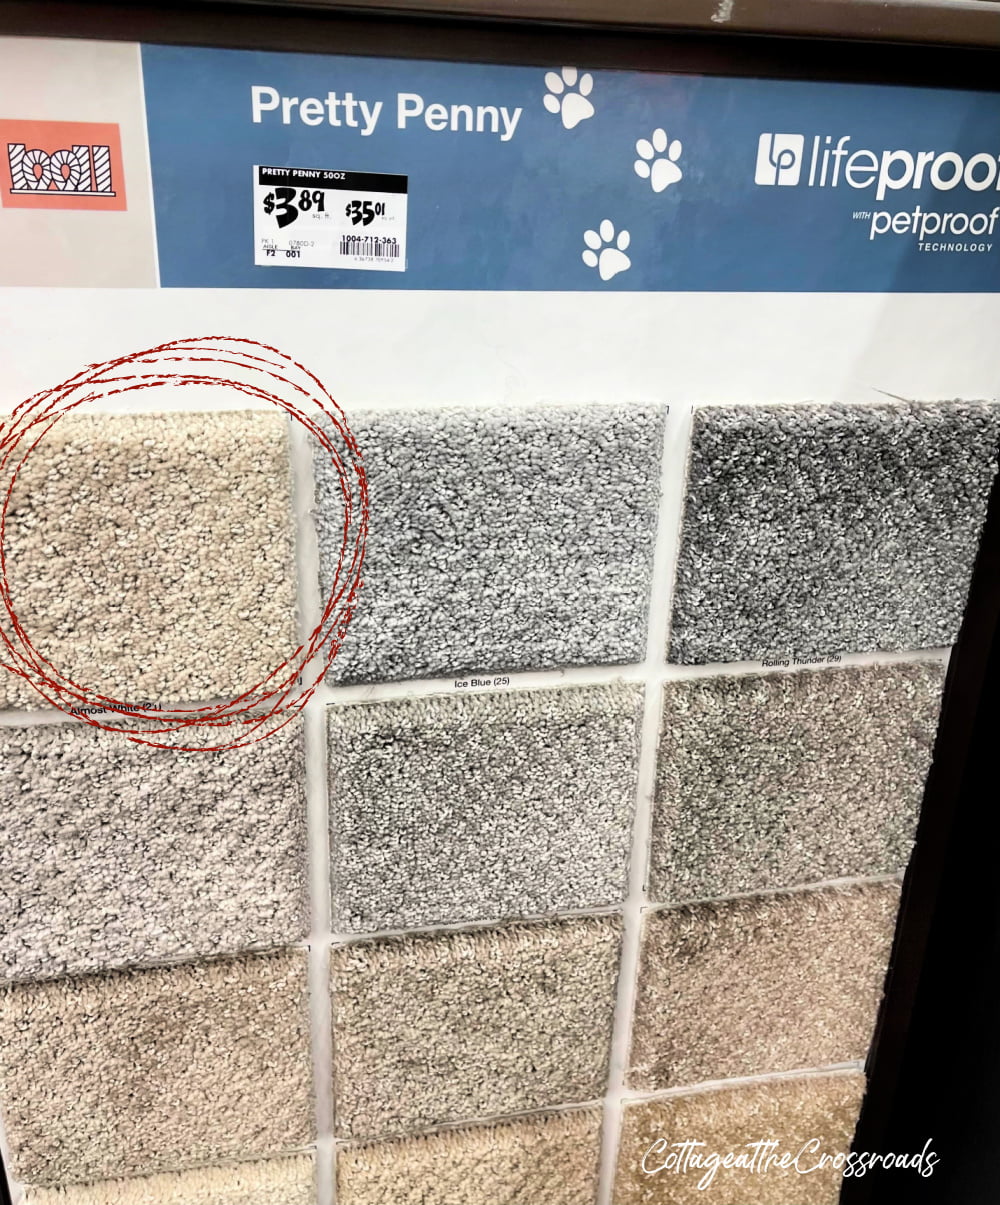 Photo showing the colors available in petproof carpet